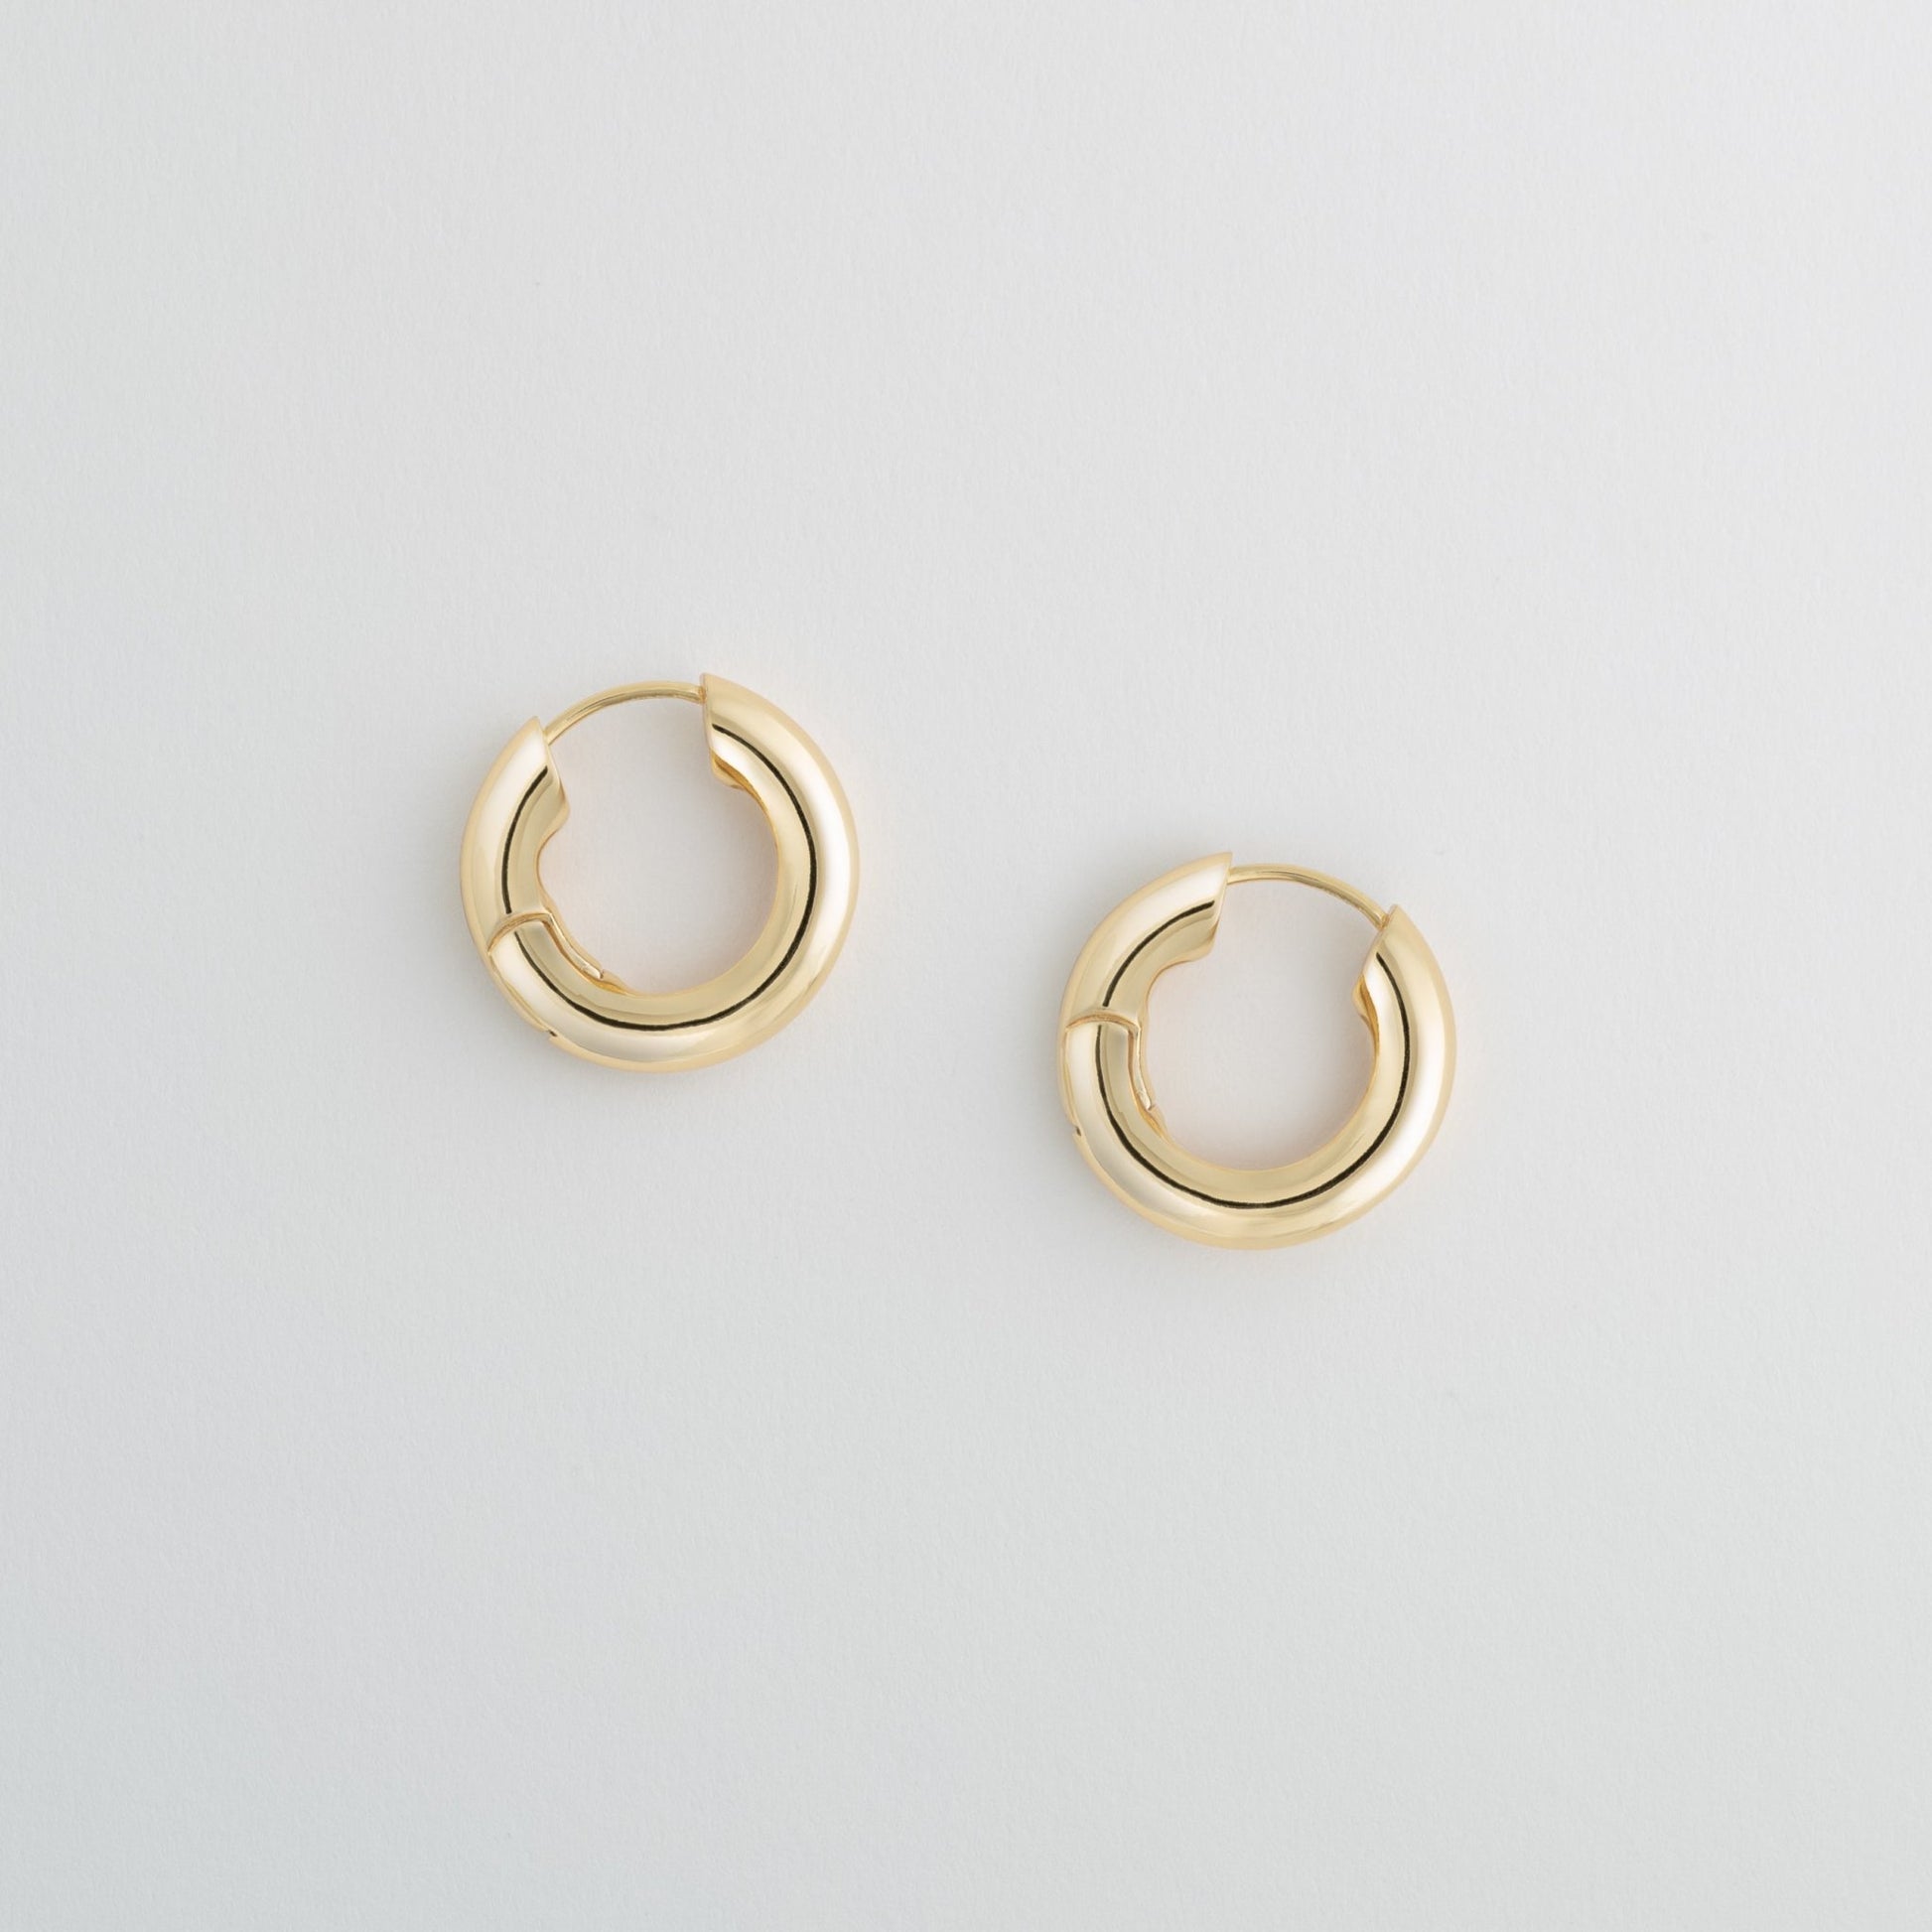 Chunky Hoops in Gold with Glitter Charm